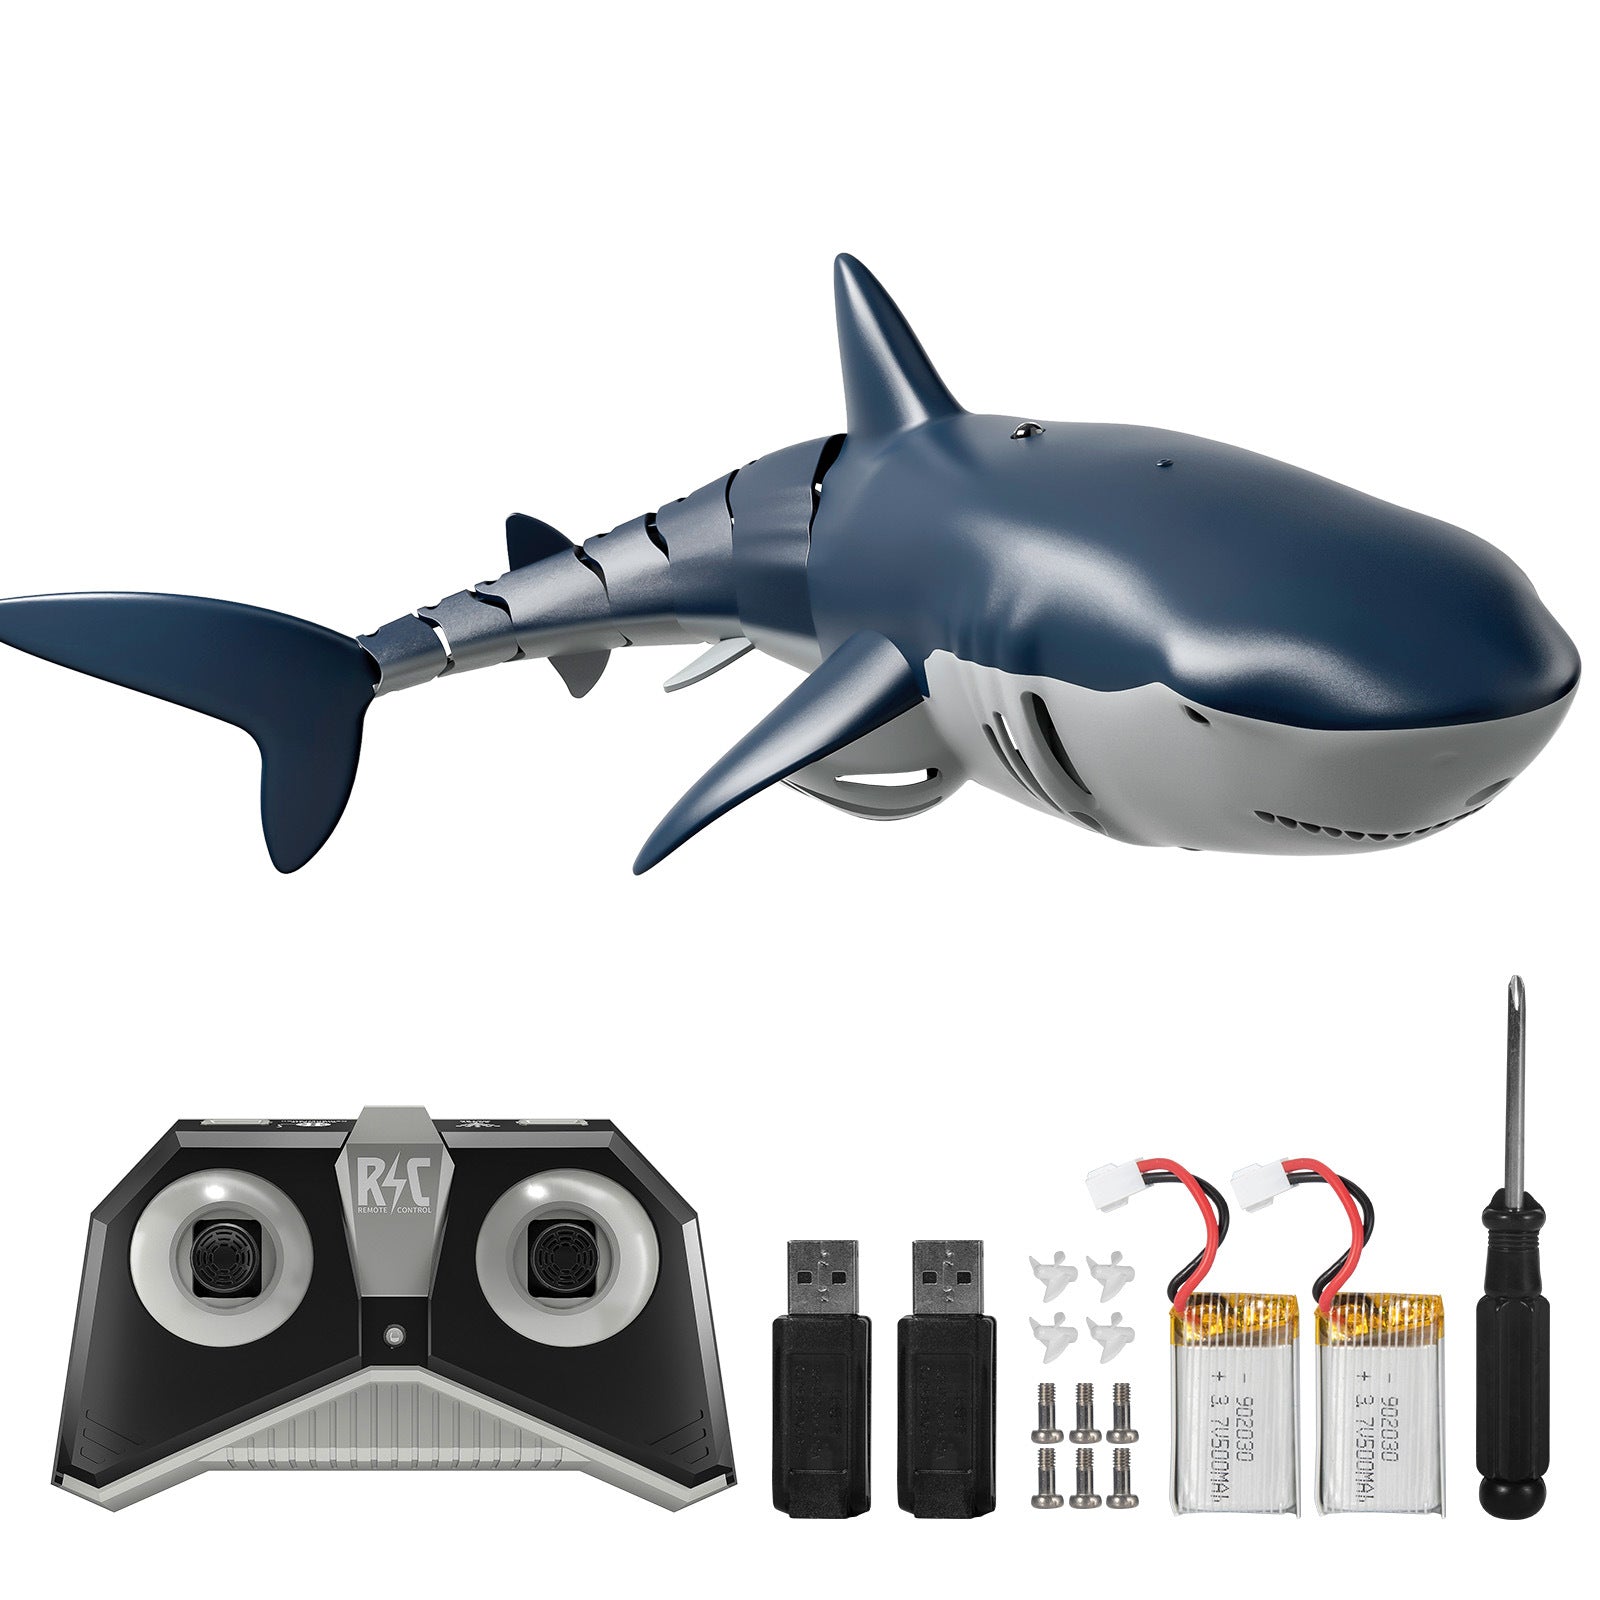 Remote Control Shark 1:18 High Simulation Scale Fish With Light & Spray Water For Lake Bathroom Pool Toys For Kids Ages 4 5 7 8 Boys  Birthday Gift RC Boat